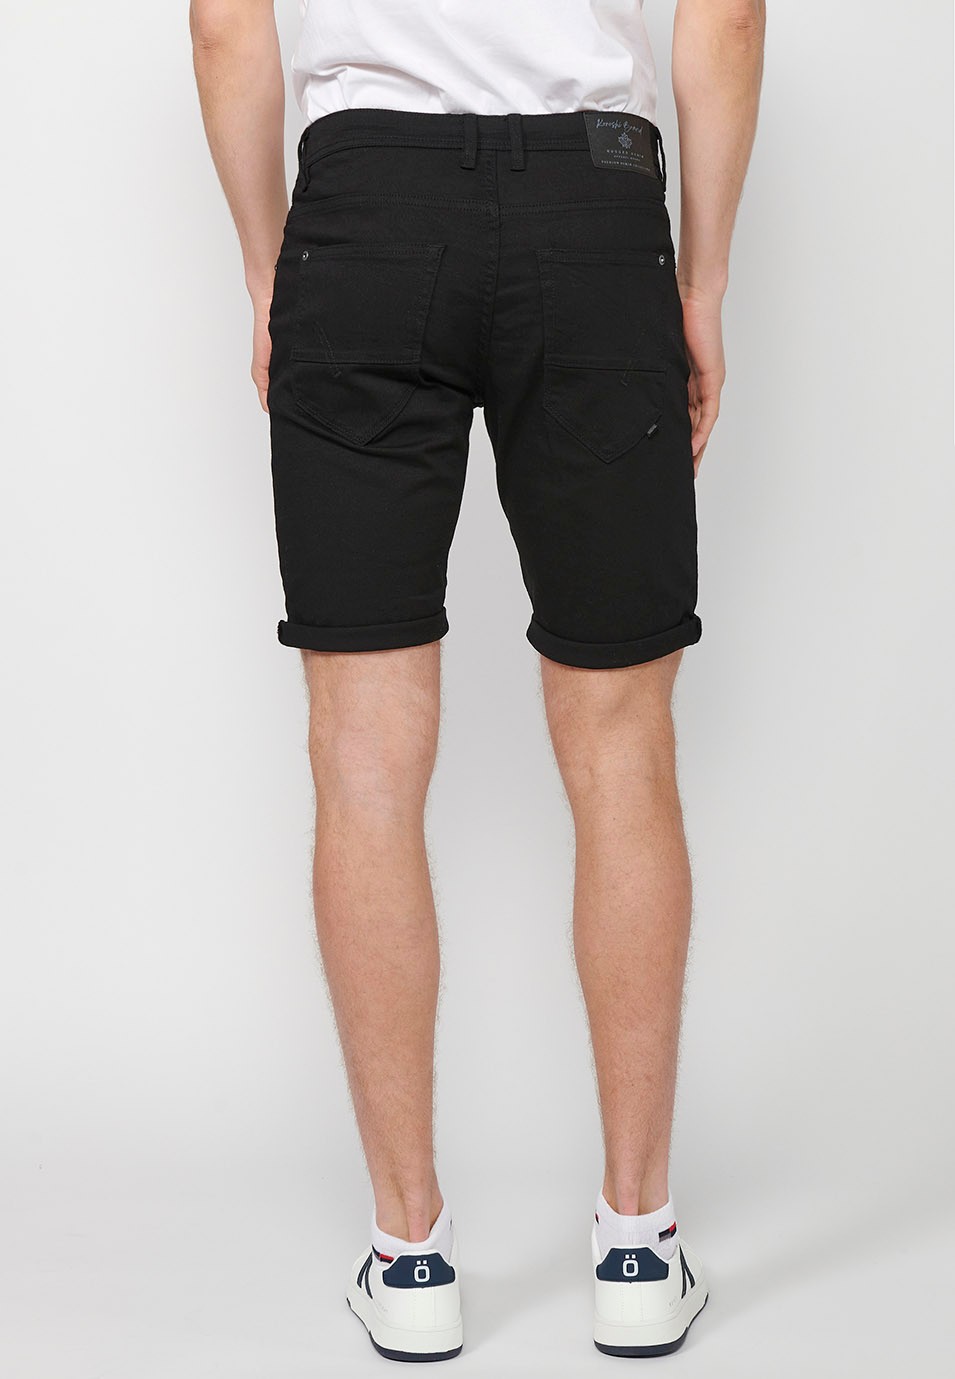 Denim Bermuda shorts with cuffed finish and front zipper and button closure. Five pockets, one black color pocket for men 8